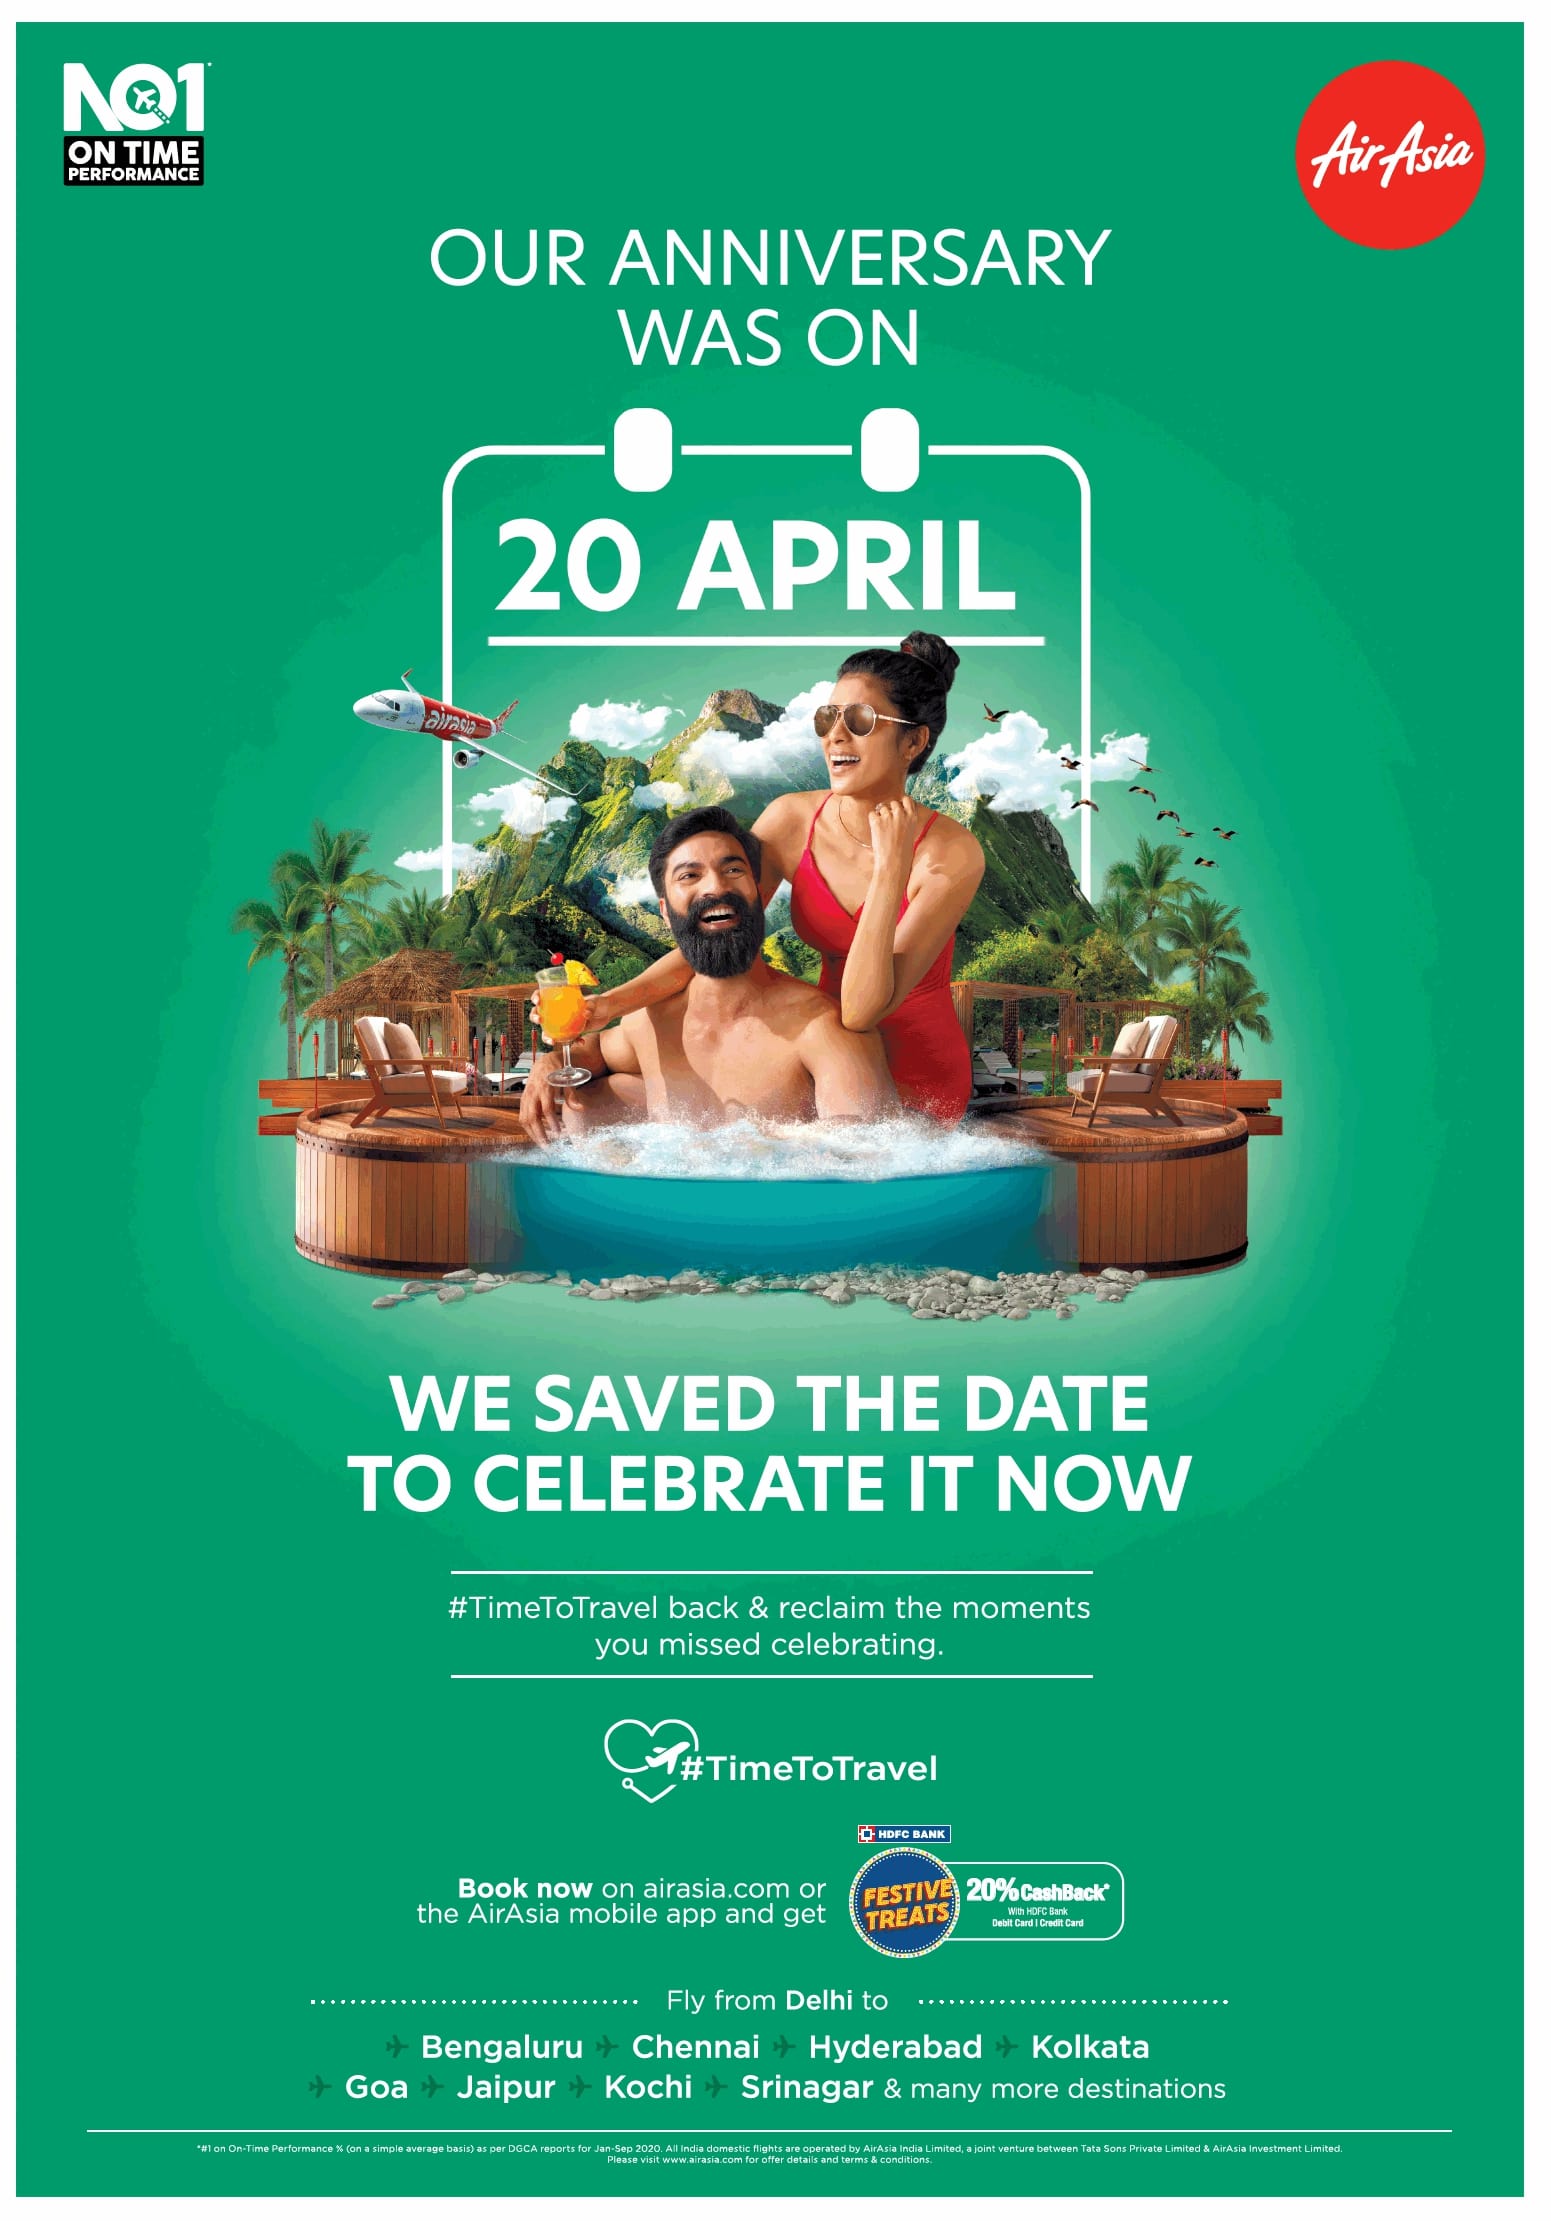 air-aisa-our-anniversary-was-on-20-april-we-saved-the-date-to-celebrate-it-now-ad-toi-delhi-12-11-2020